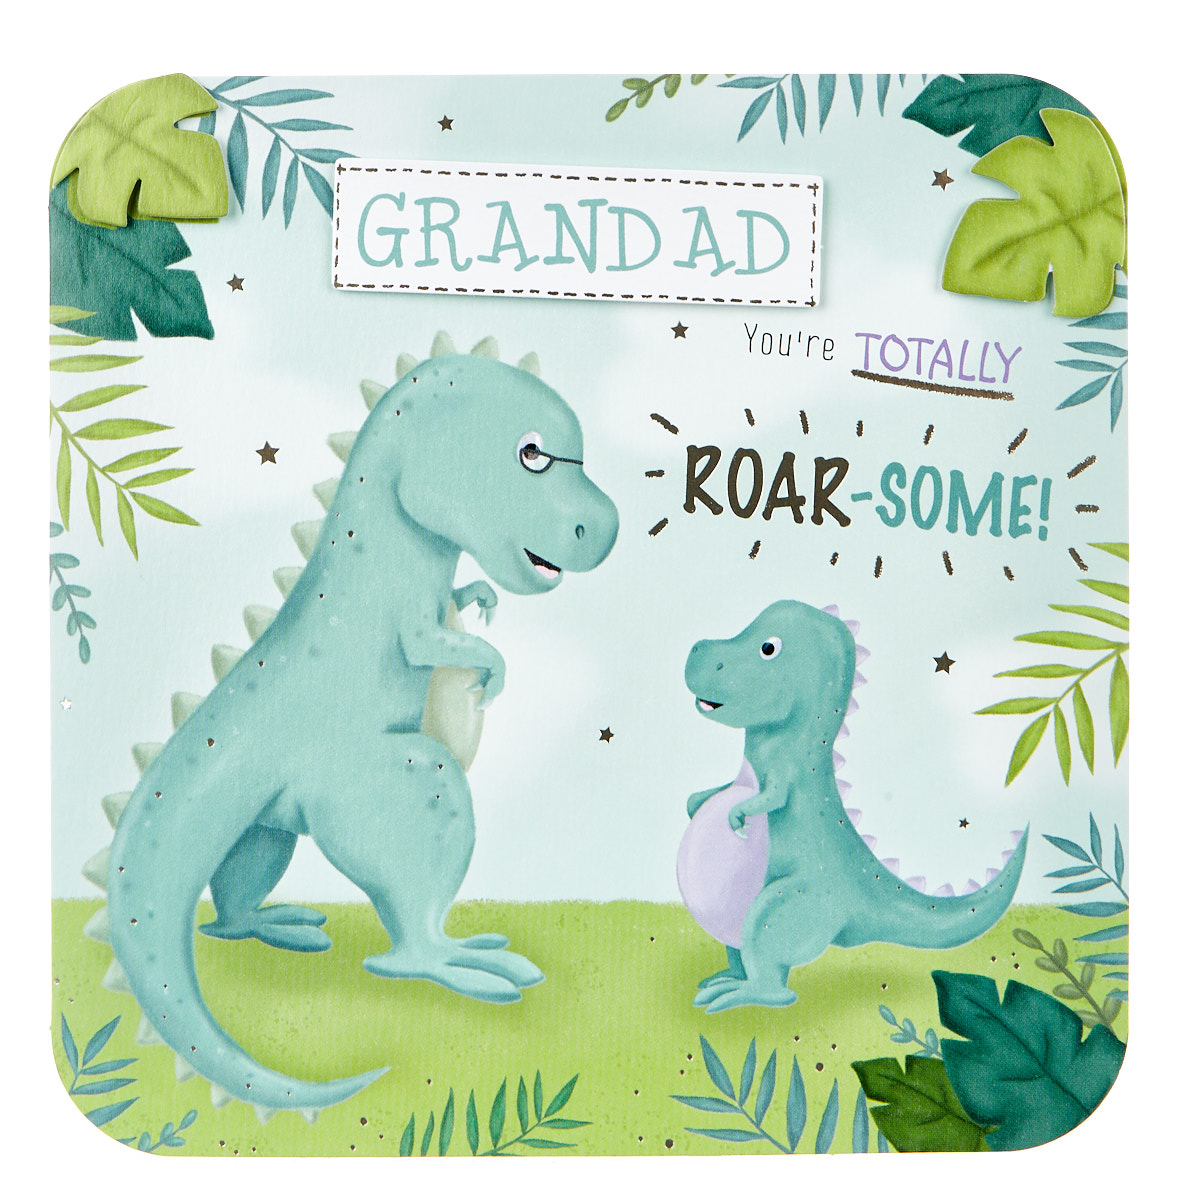 VIP Collection Father's Day Card - Grandad, Totally Roar-some